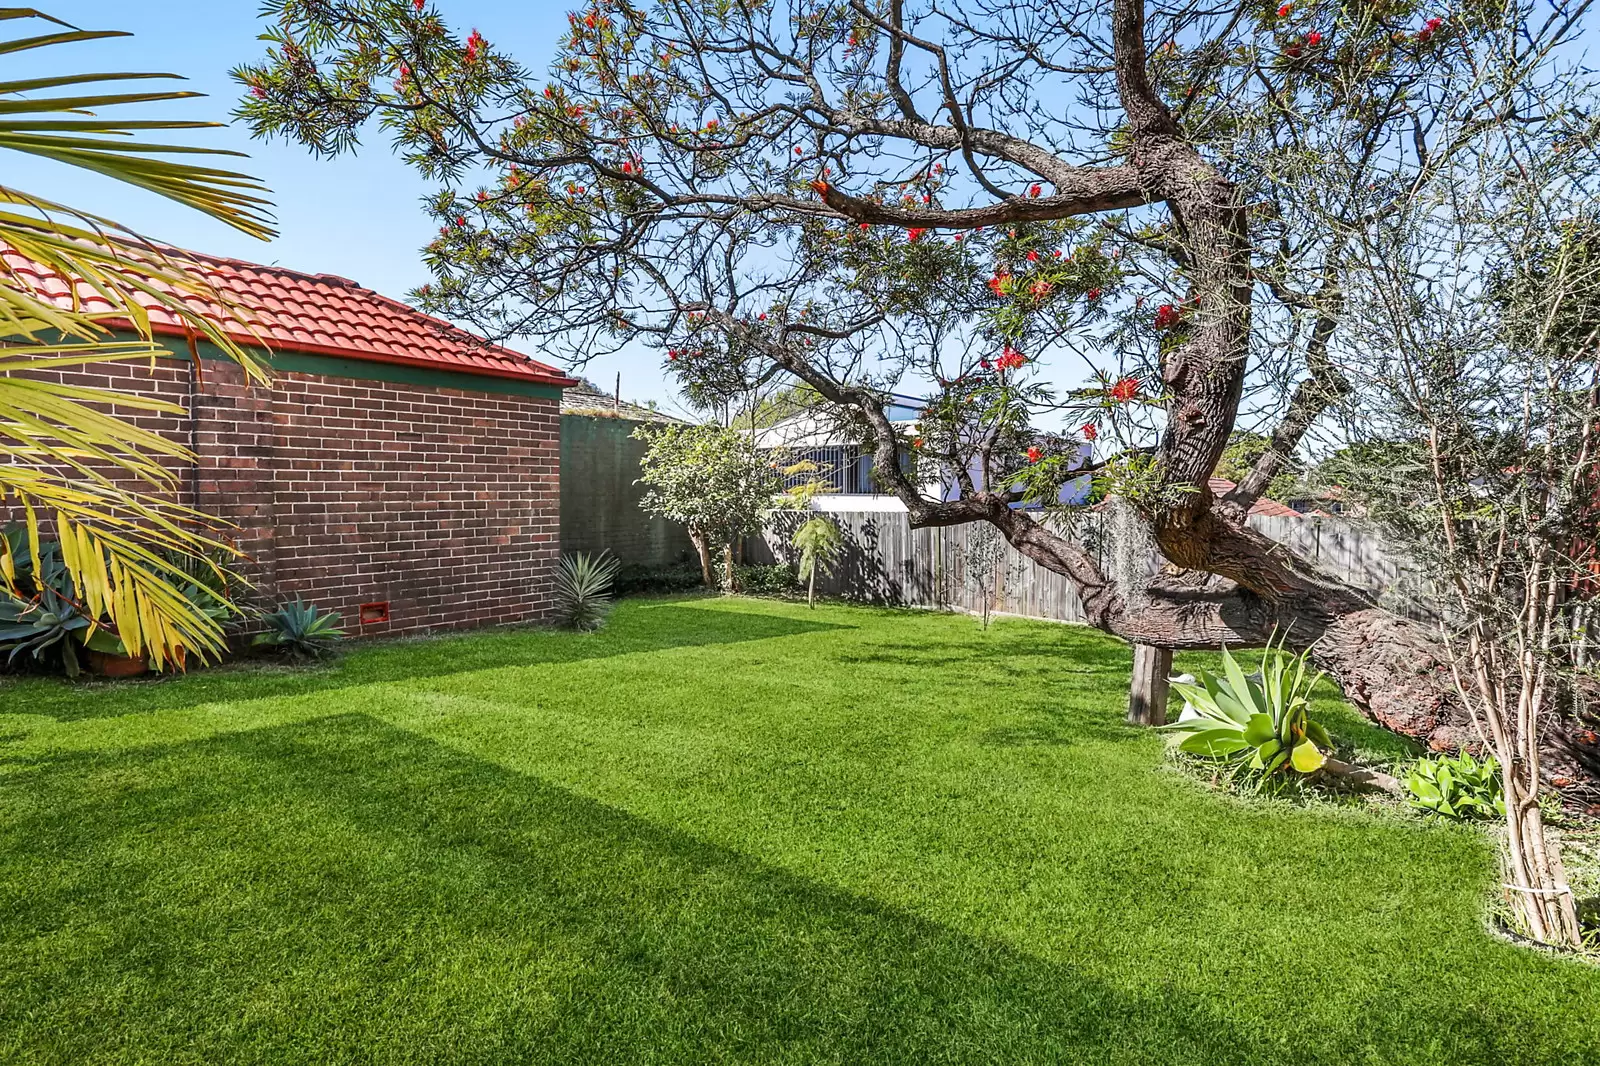 Photo #5: 61 Tunstall Avenue, Kingsford - Auction by Sydney Sotheby's International Realty